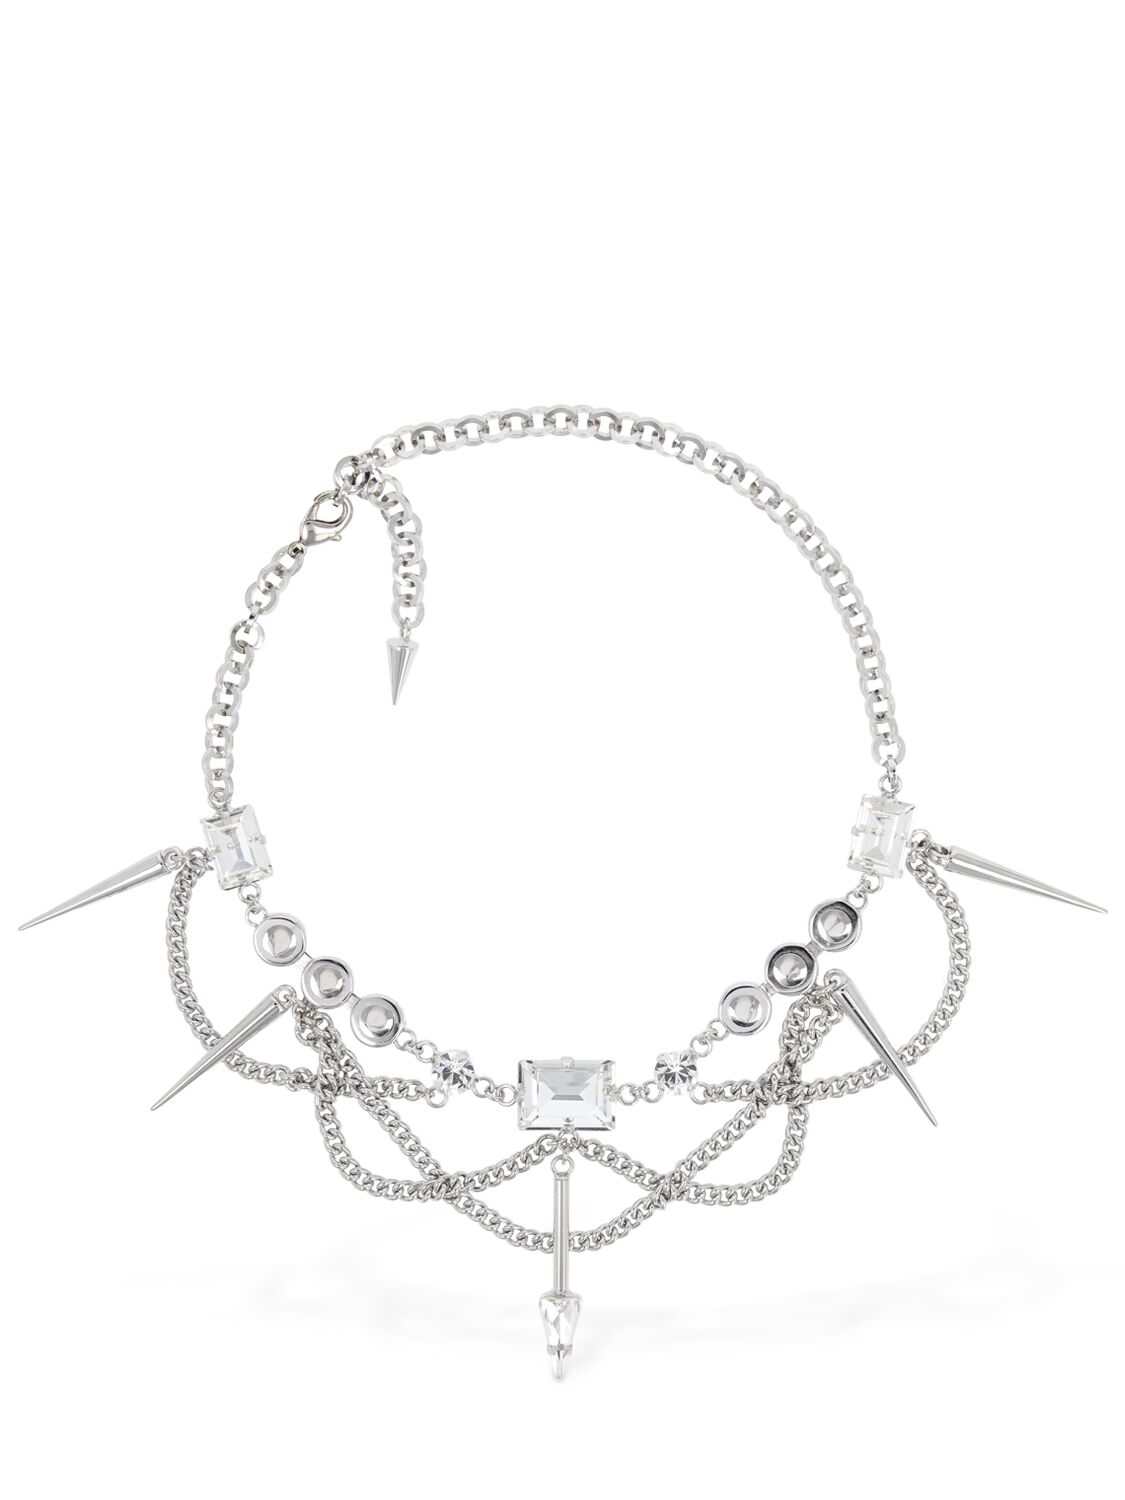 Chain Necklace W/ Spikes & Crystals